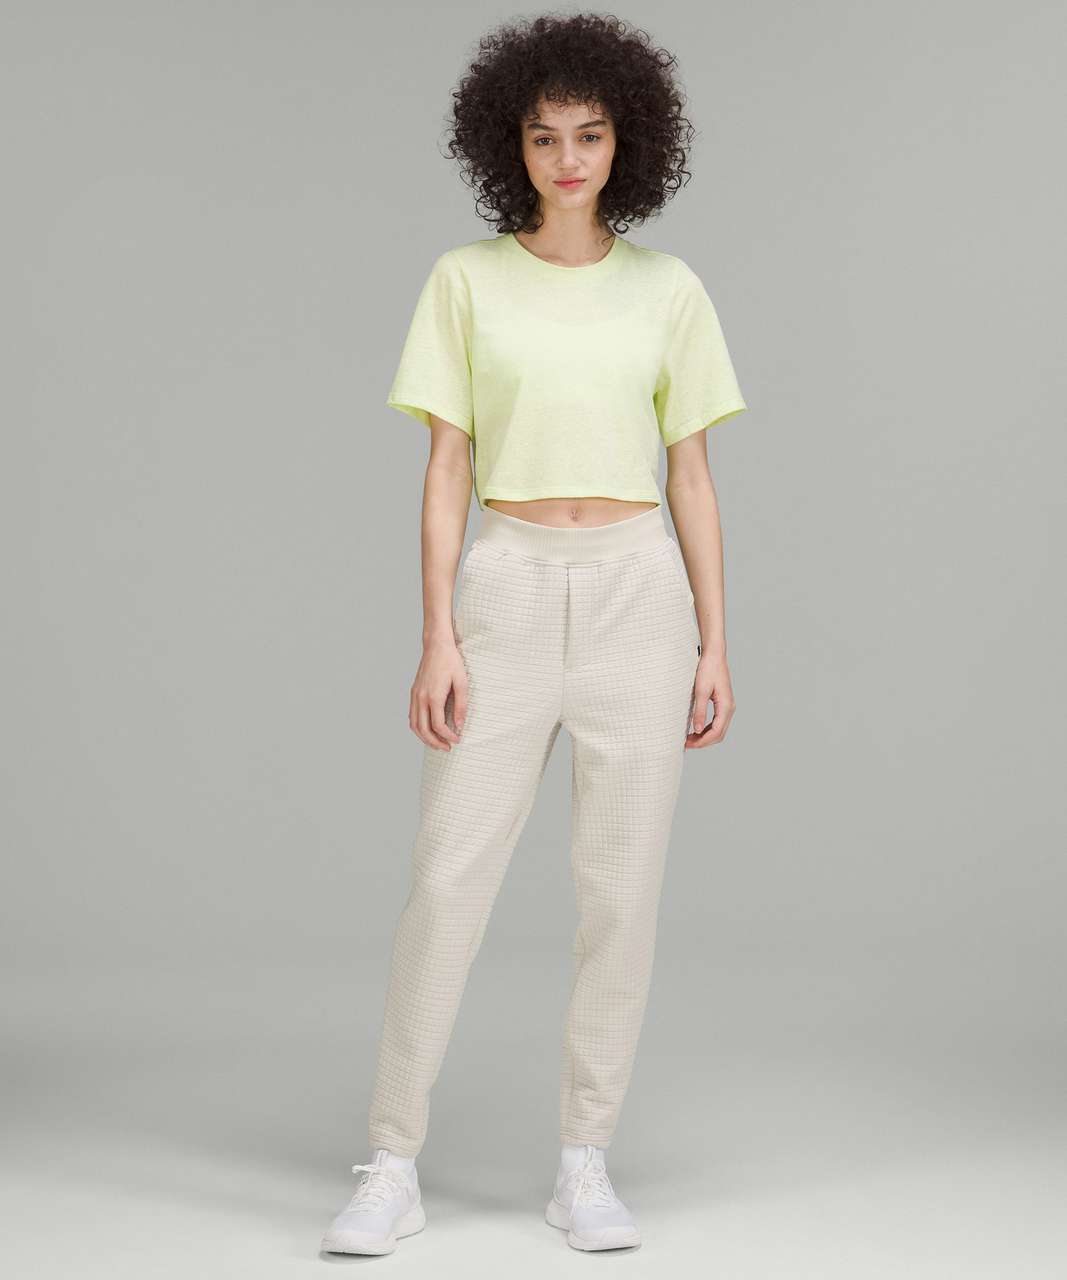 Lululemon lab Relaxed Cropped Crewneck T-Shirt - Crispin Green / White